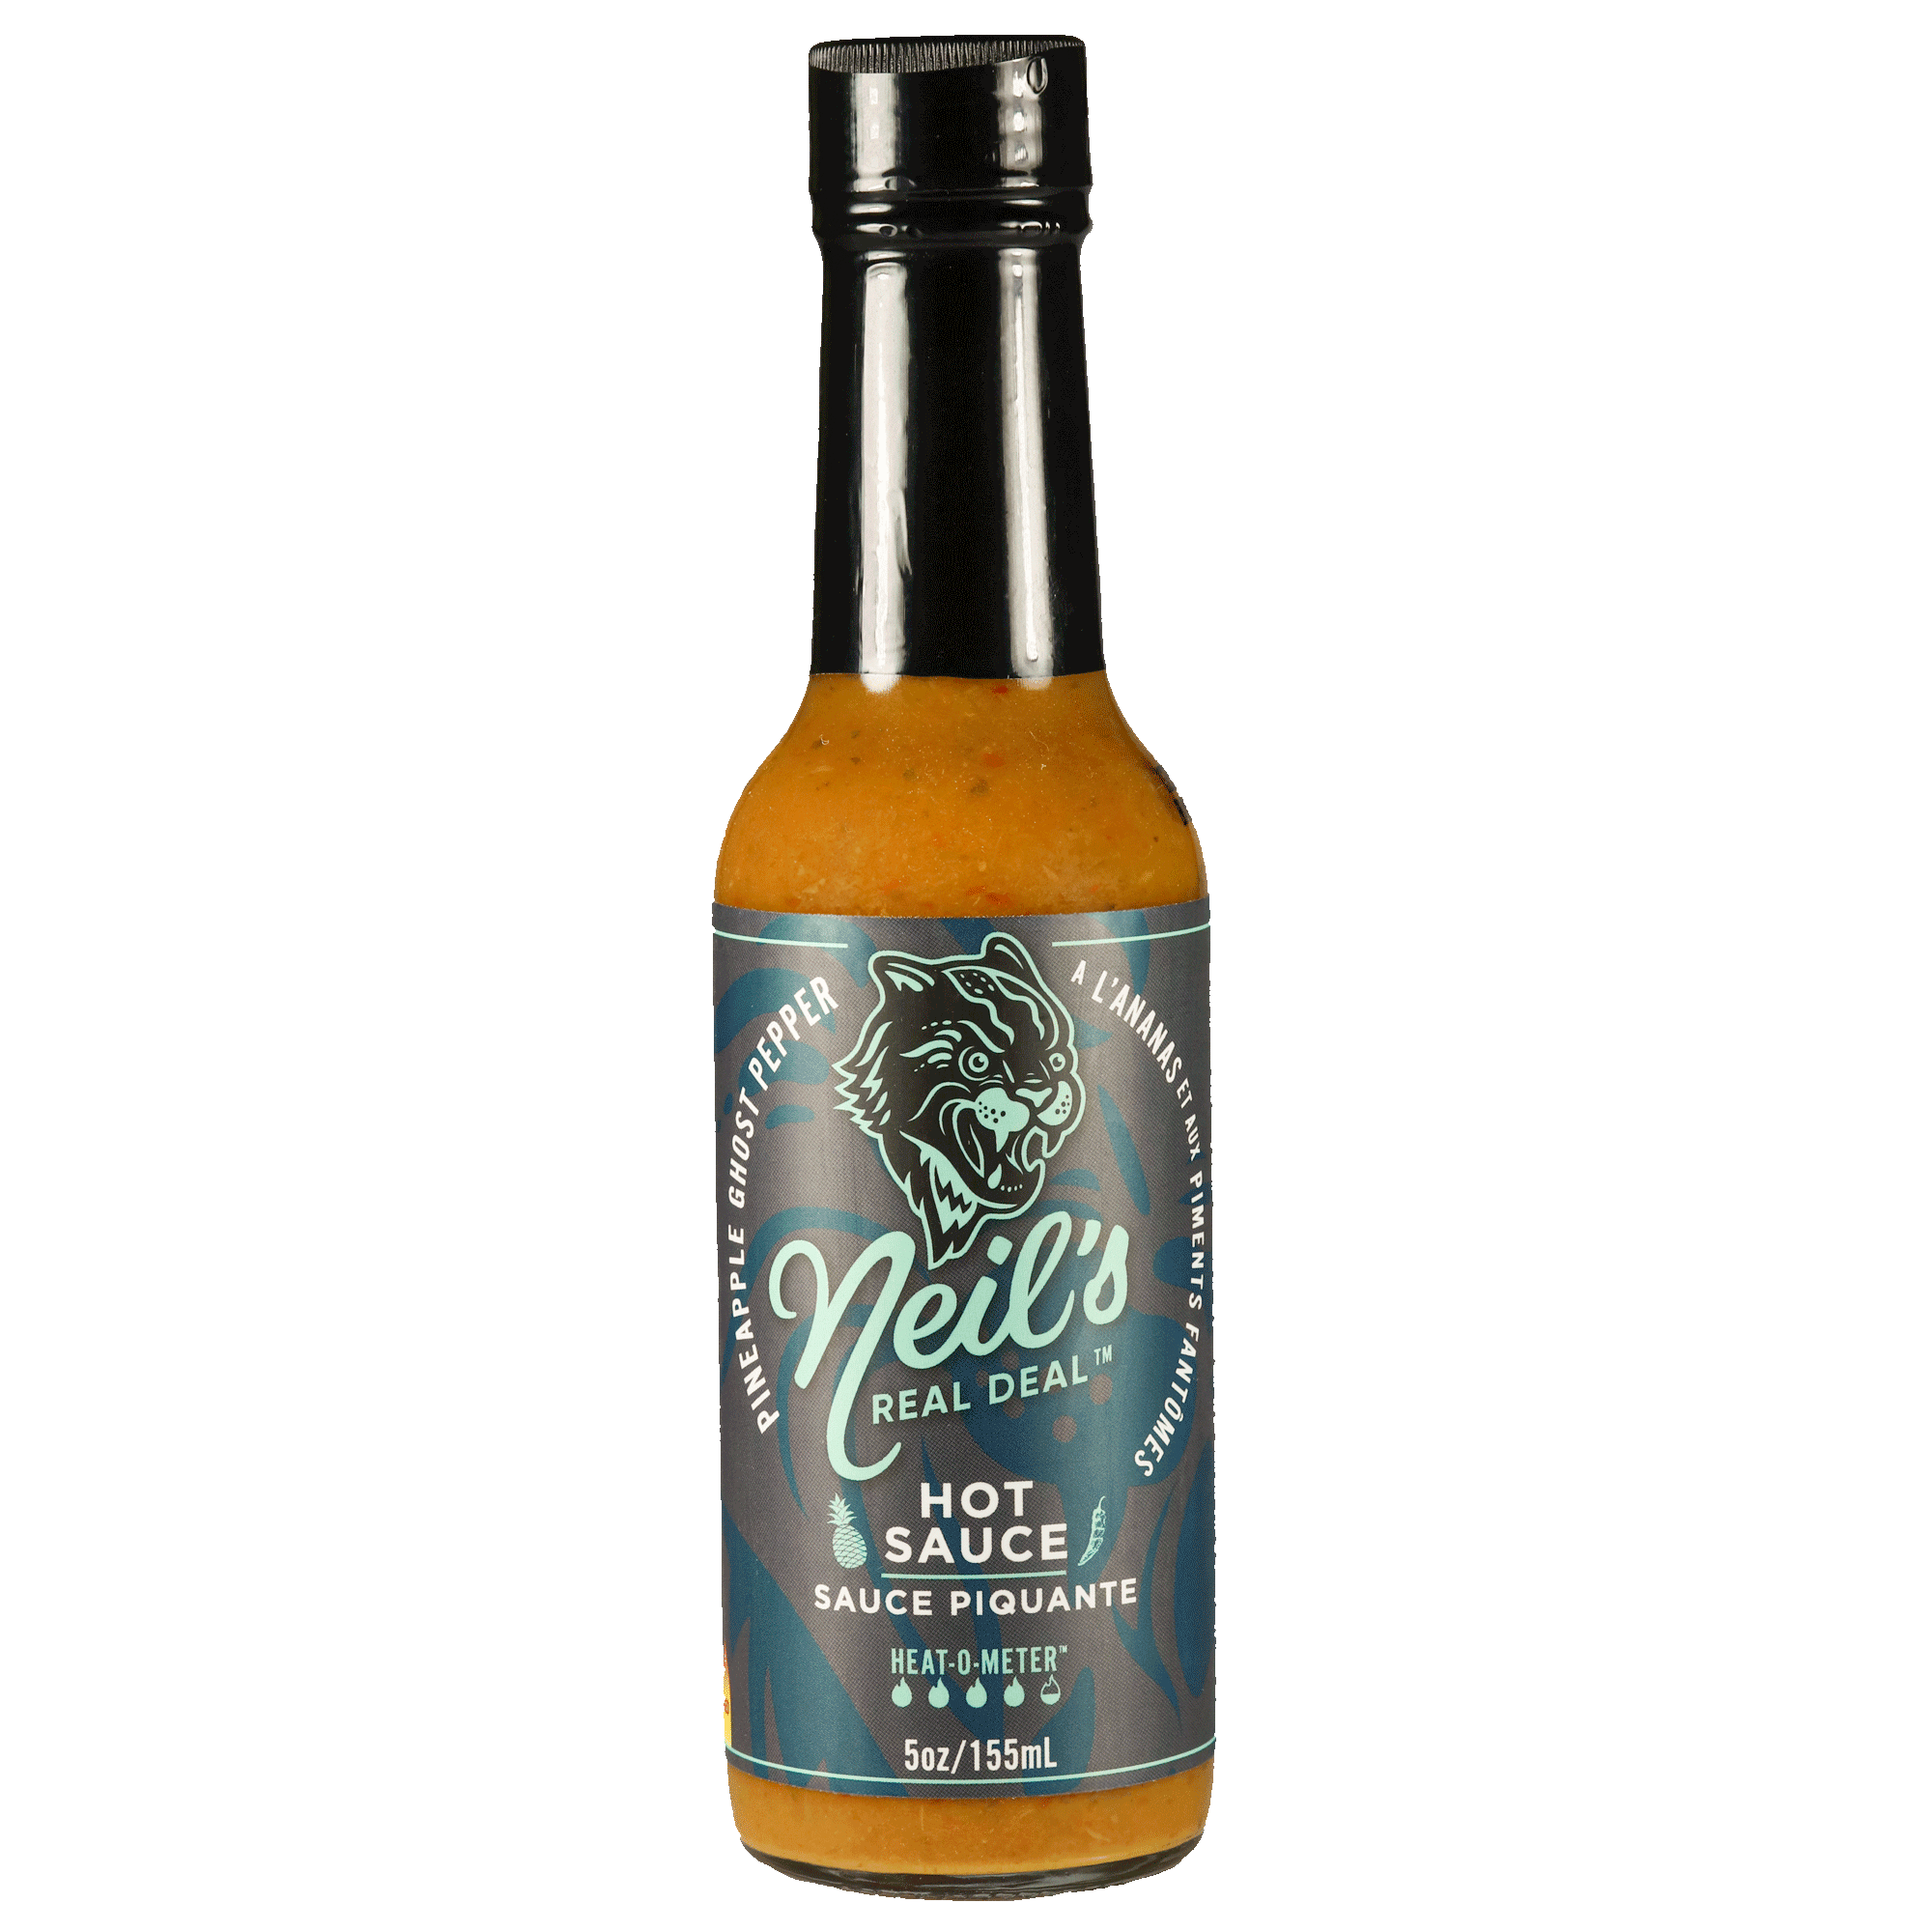 Pineapple Ghost Hot Sauce - Neil's Real Deal